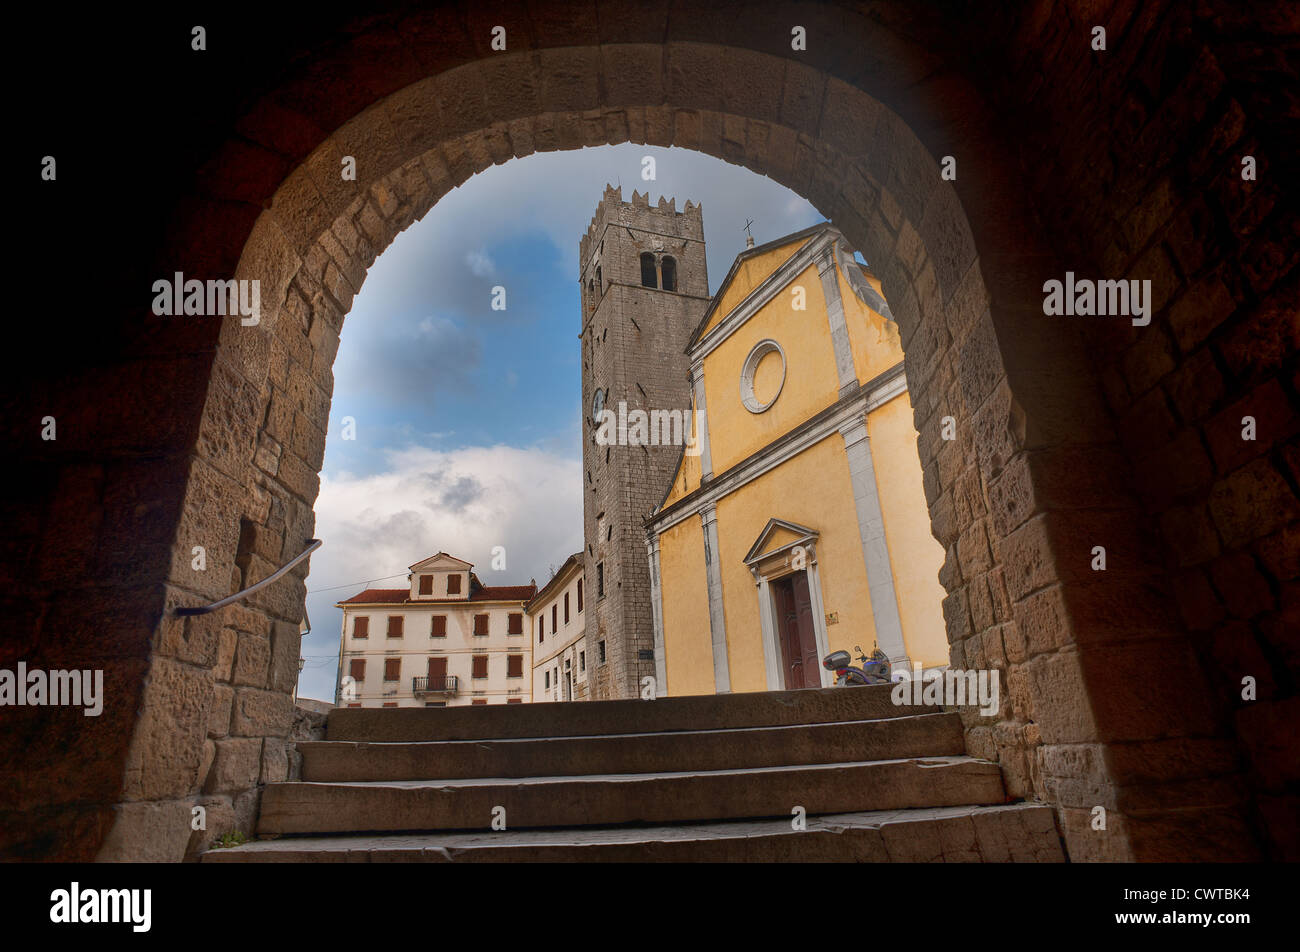 A view through a stepped archway of the church in the Istrian town of Motovun, Croatia Stock Photo